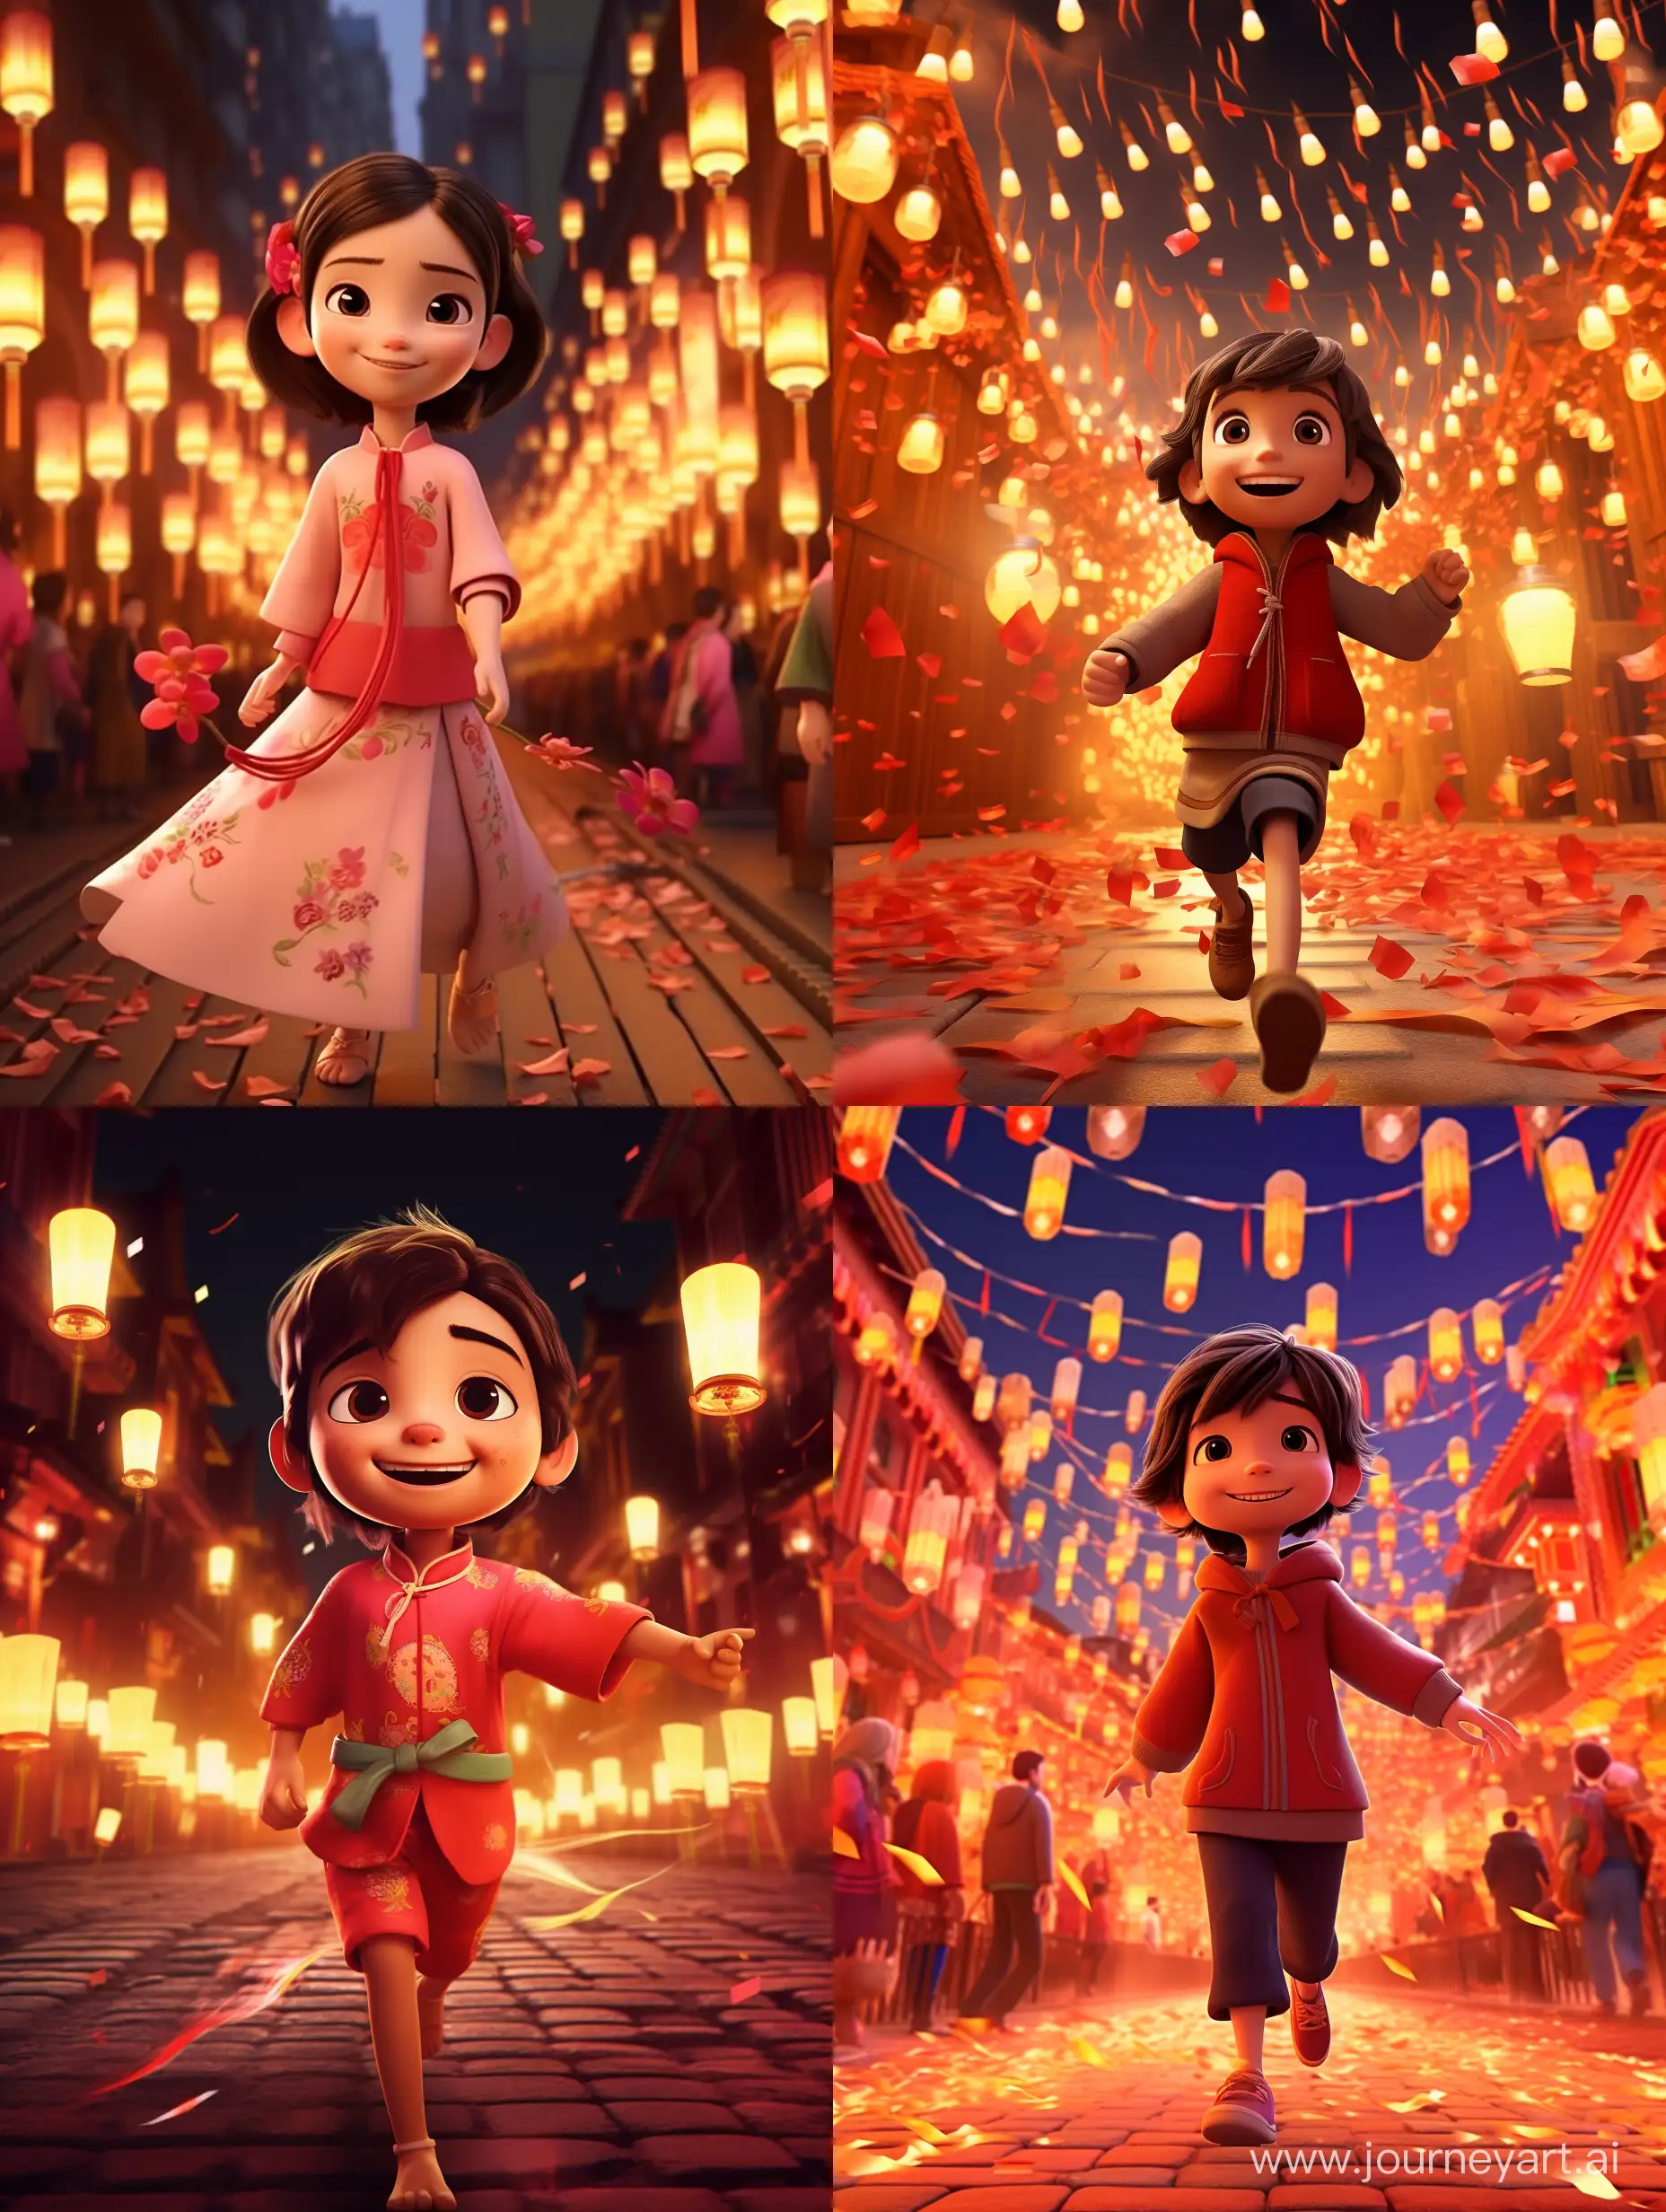 Festive-Child-in-HighDefinition-Pixar-Style-at-Chinese-New-Year-Lantern-Festival